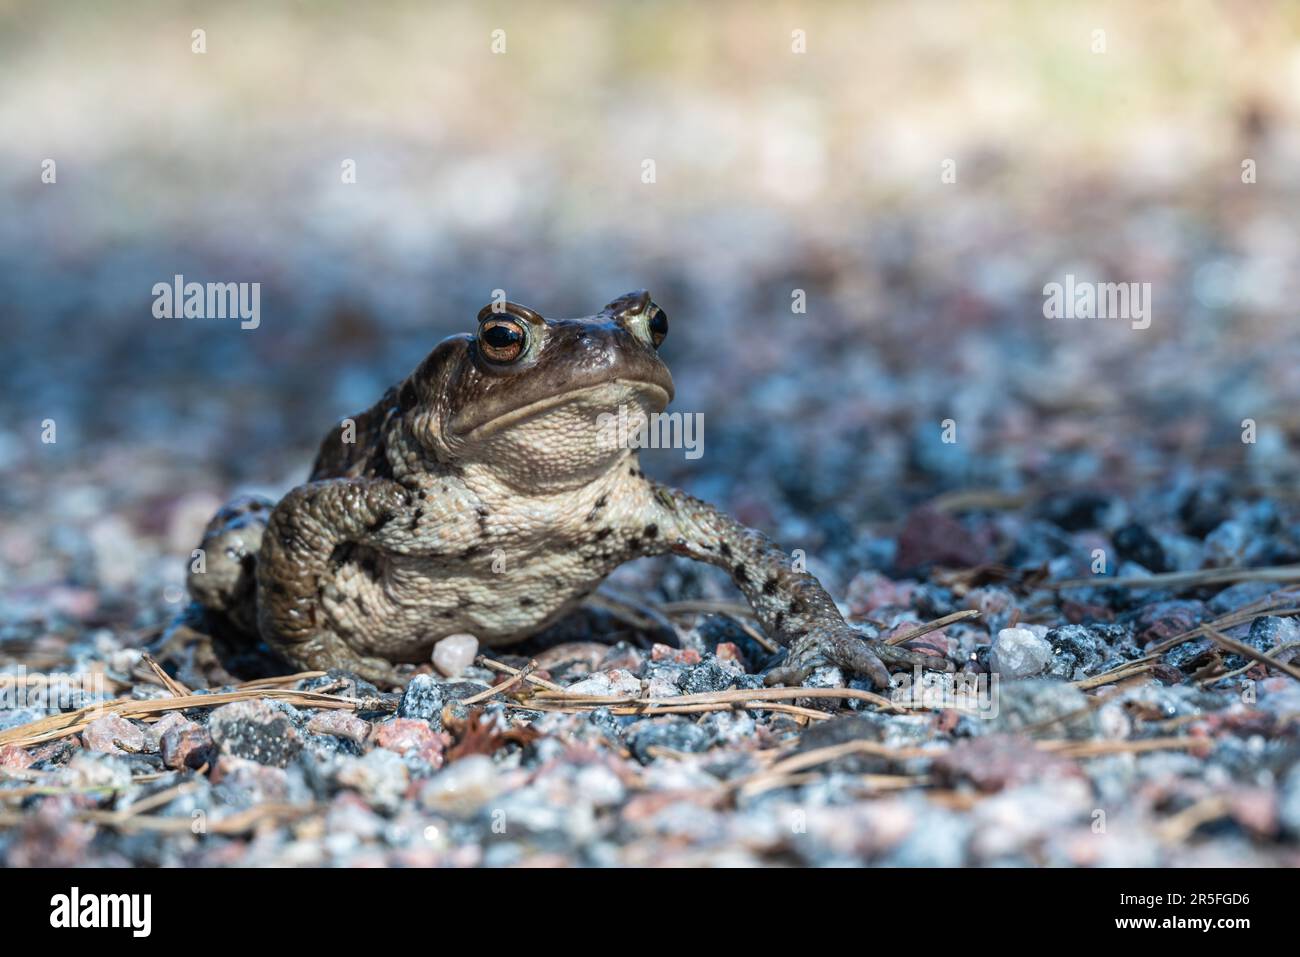 Close-up of a frog from ground level, picture from Ljusne, Sweden. Stock Photo